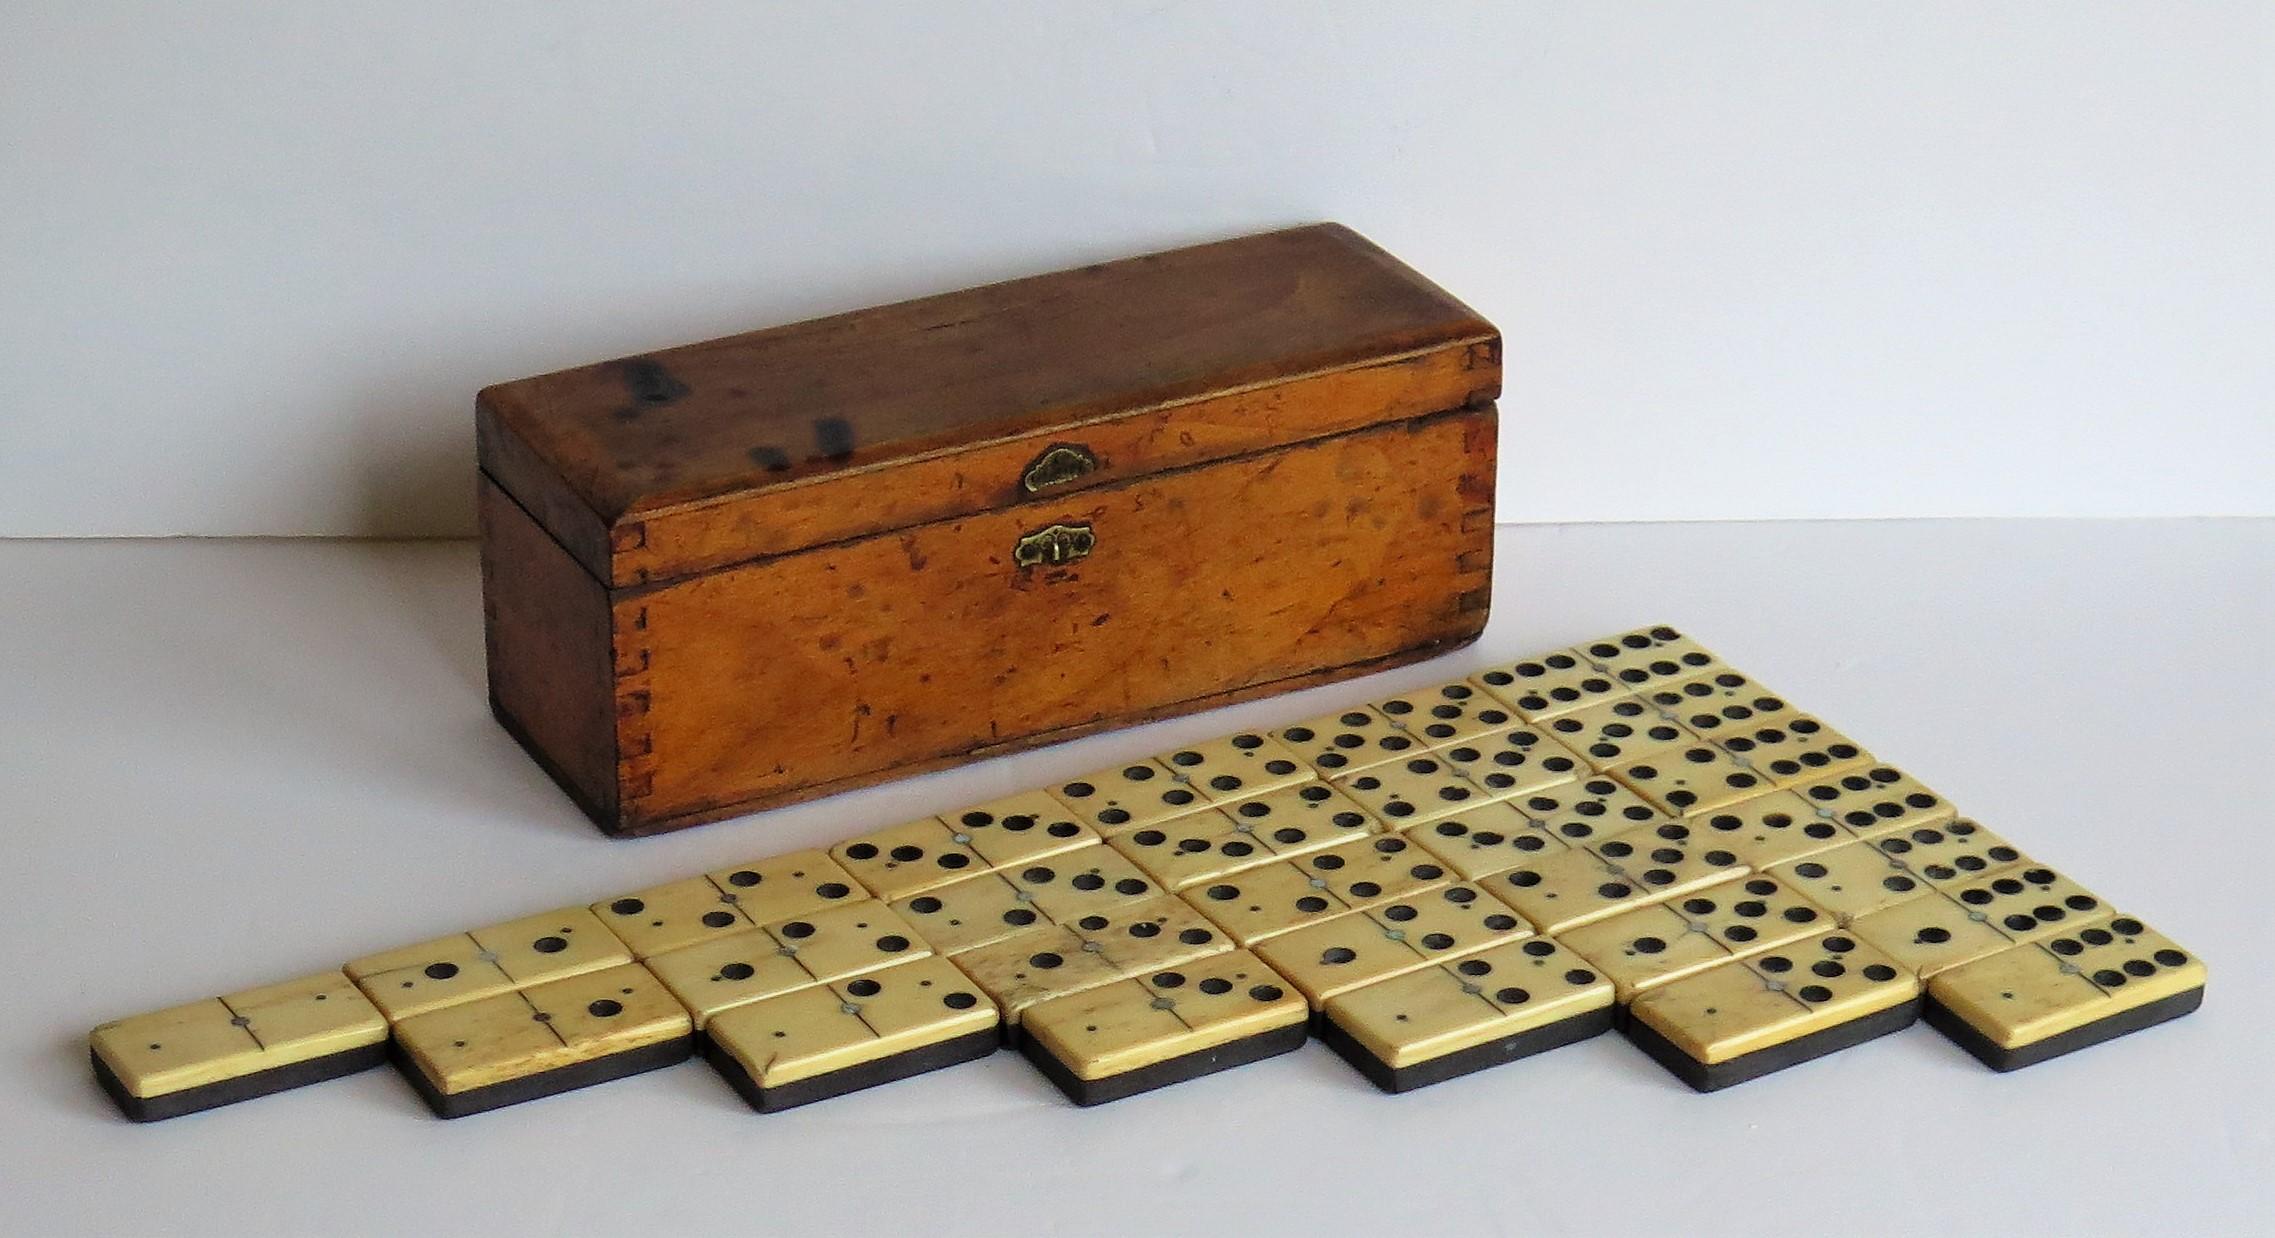 Hand-Crafted Complete 19th Century Domino Game in Hardwood Jointed Box, circa 1870